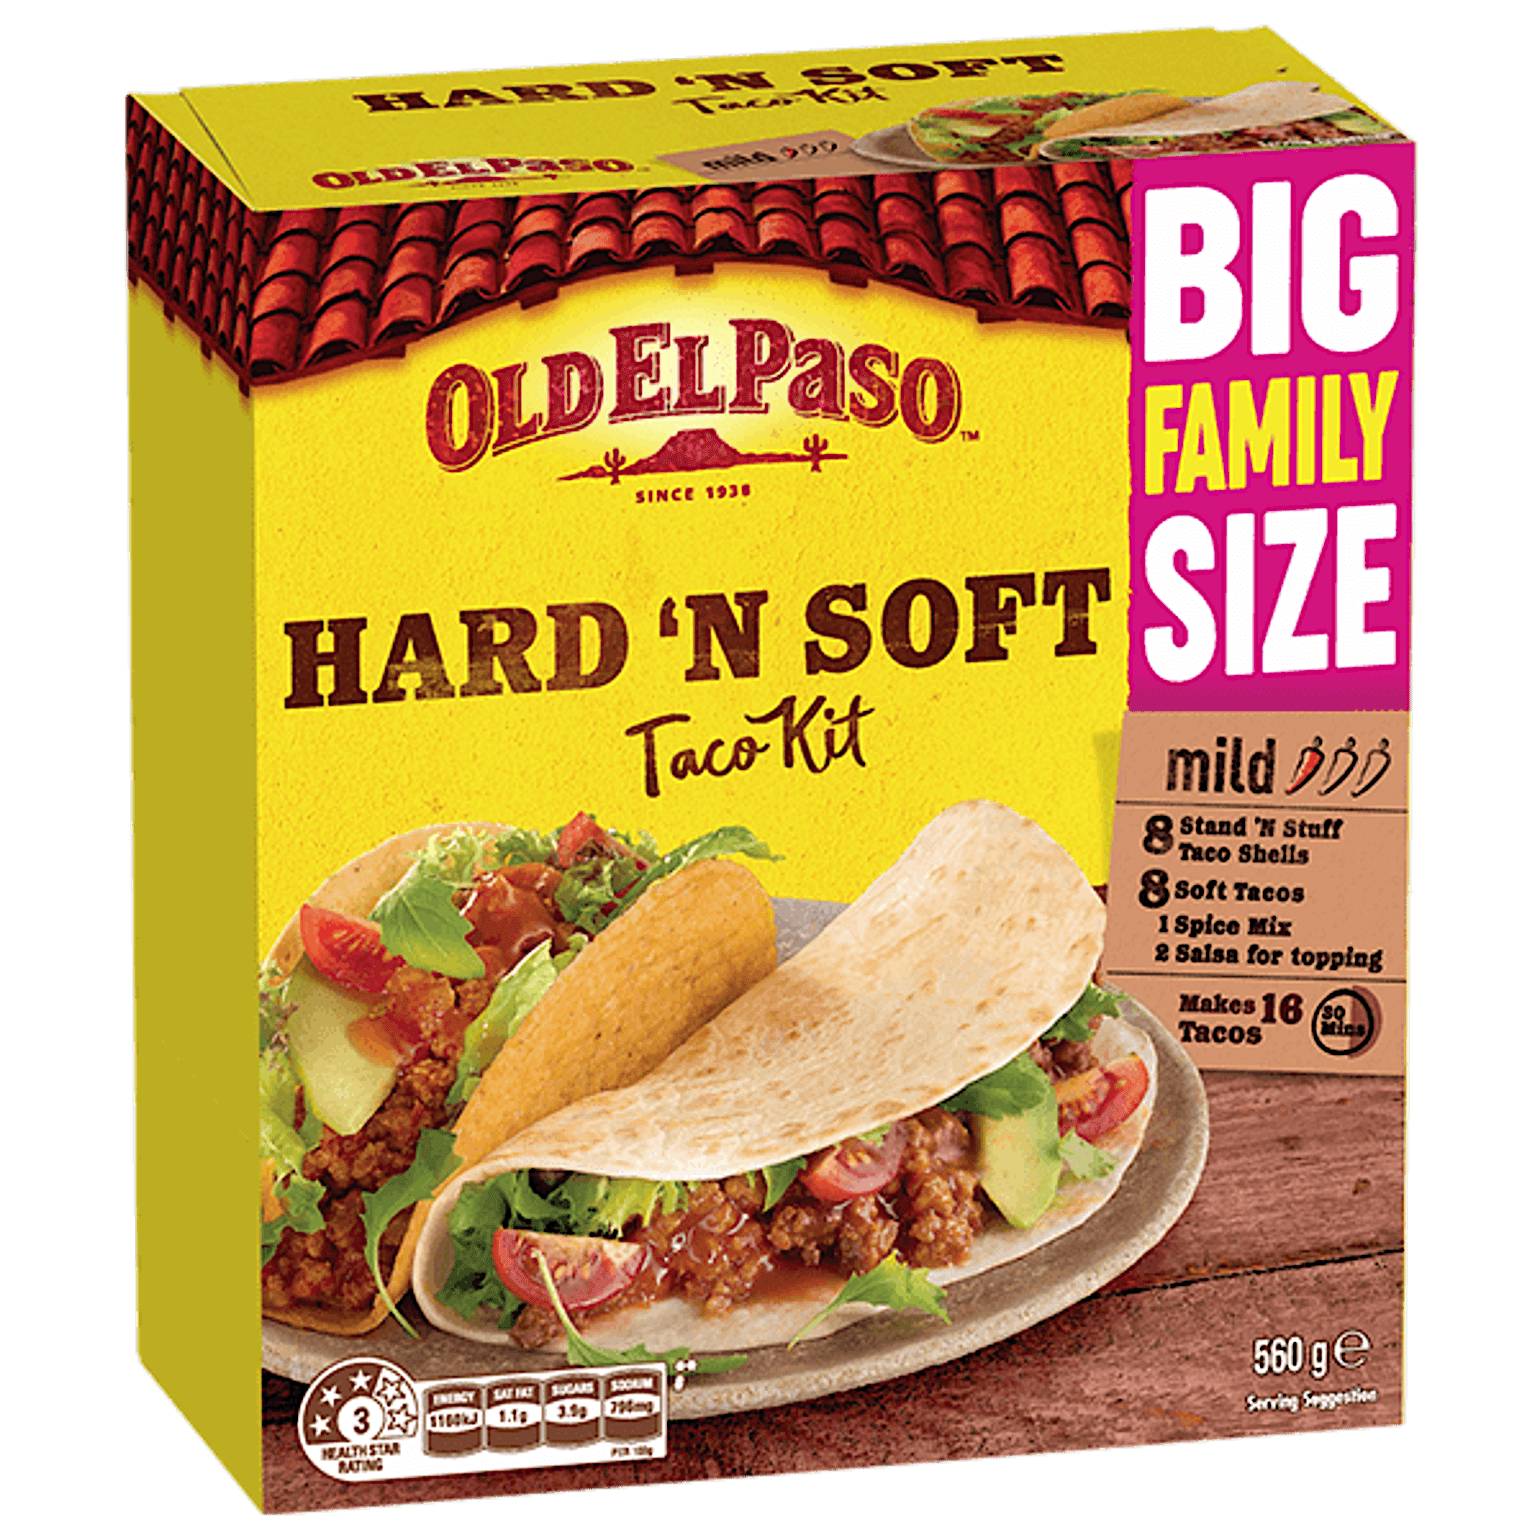 a family pack of Old El Paso's hard n soft taco kit mild containing taco shells, soft tacos, spice mix & salsa for topping (560g)